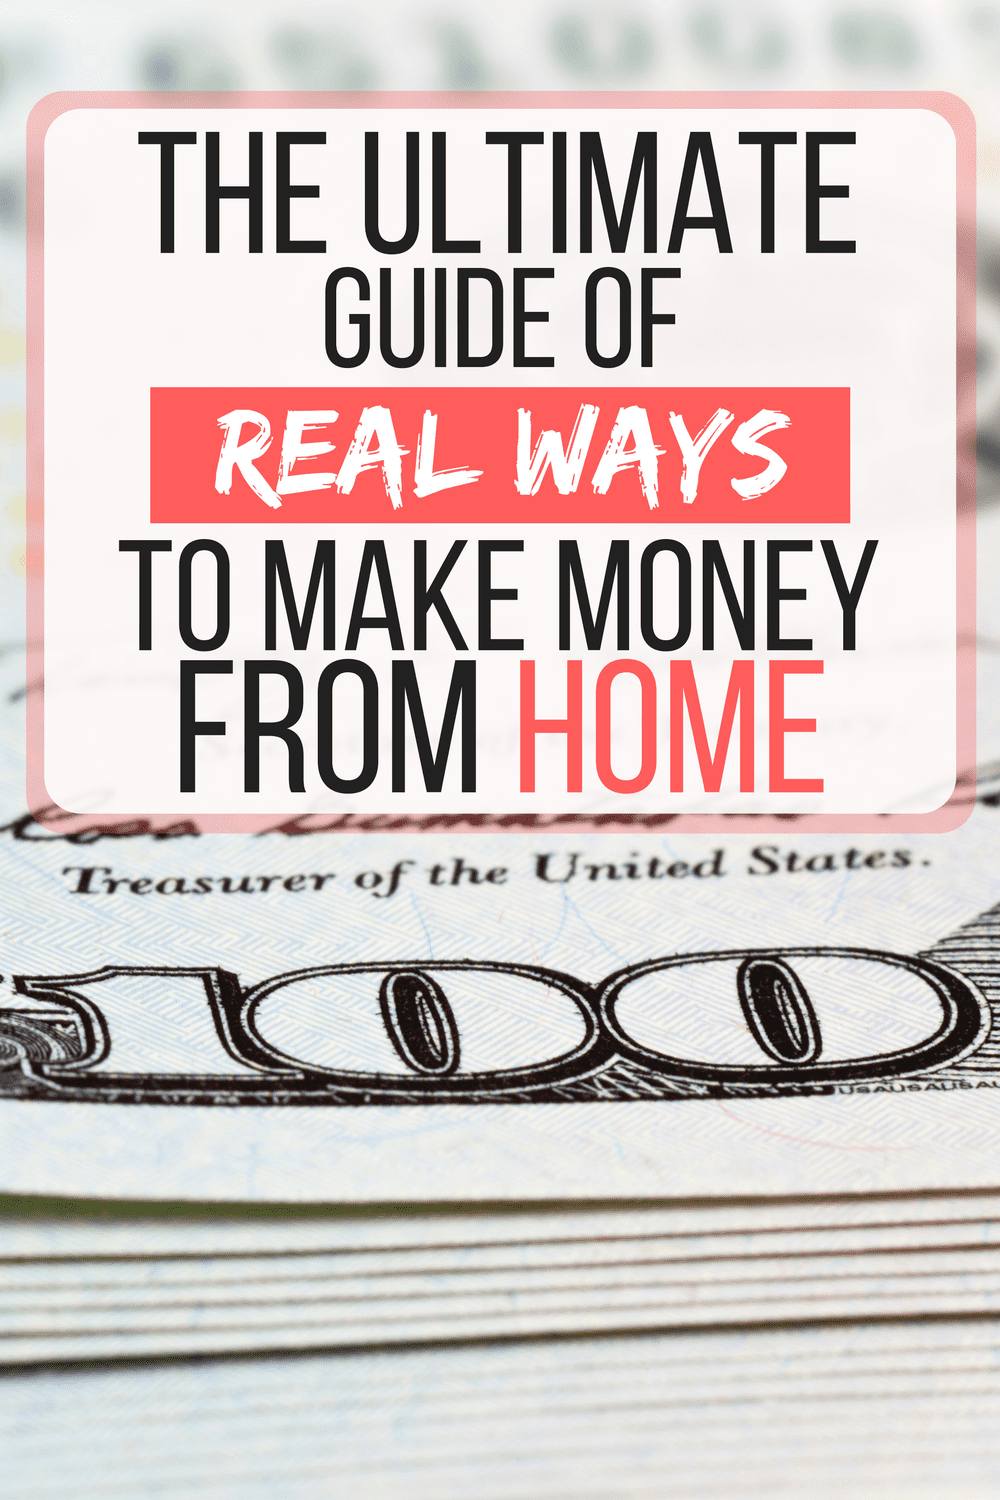 BEST LIST I've Found! Ive done almost 8 of these so far and they were all legit ways to make money from home. *Real Ways To Make Money From Home*